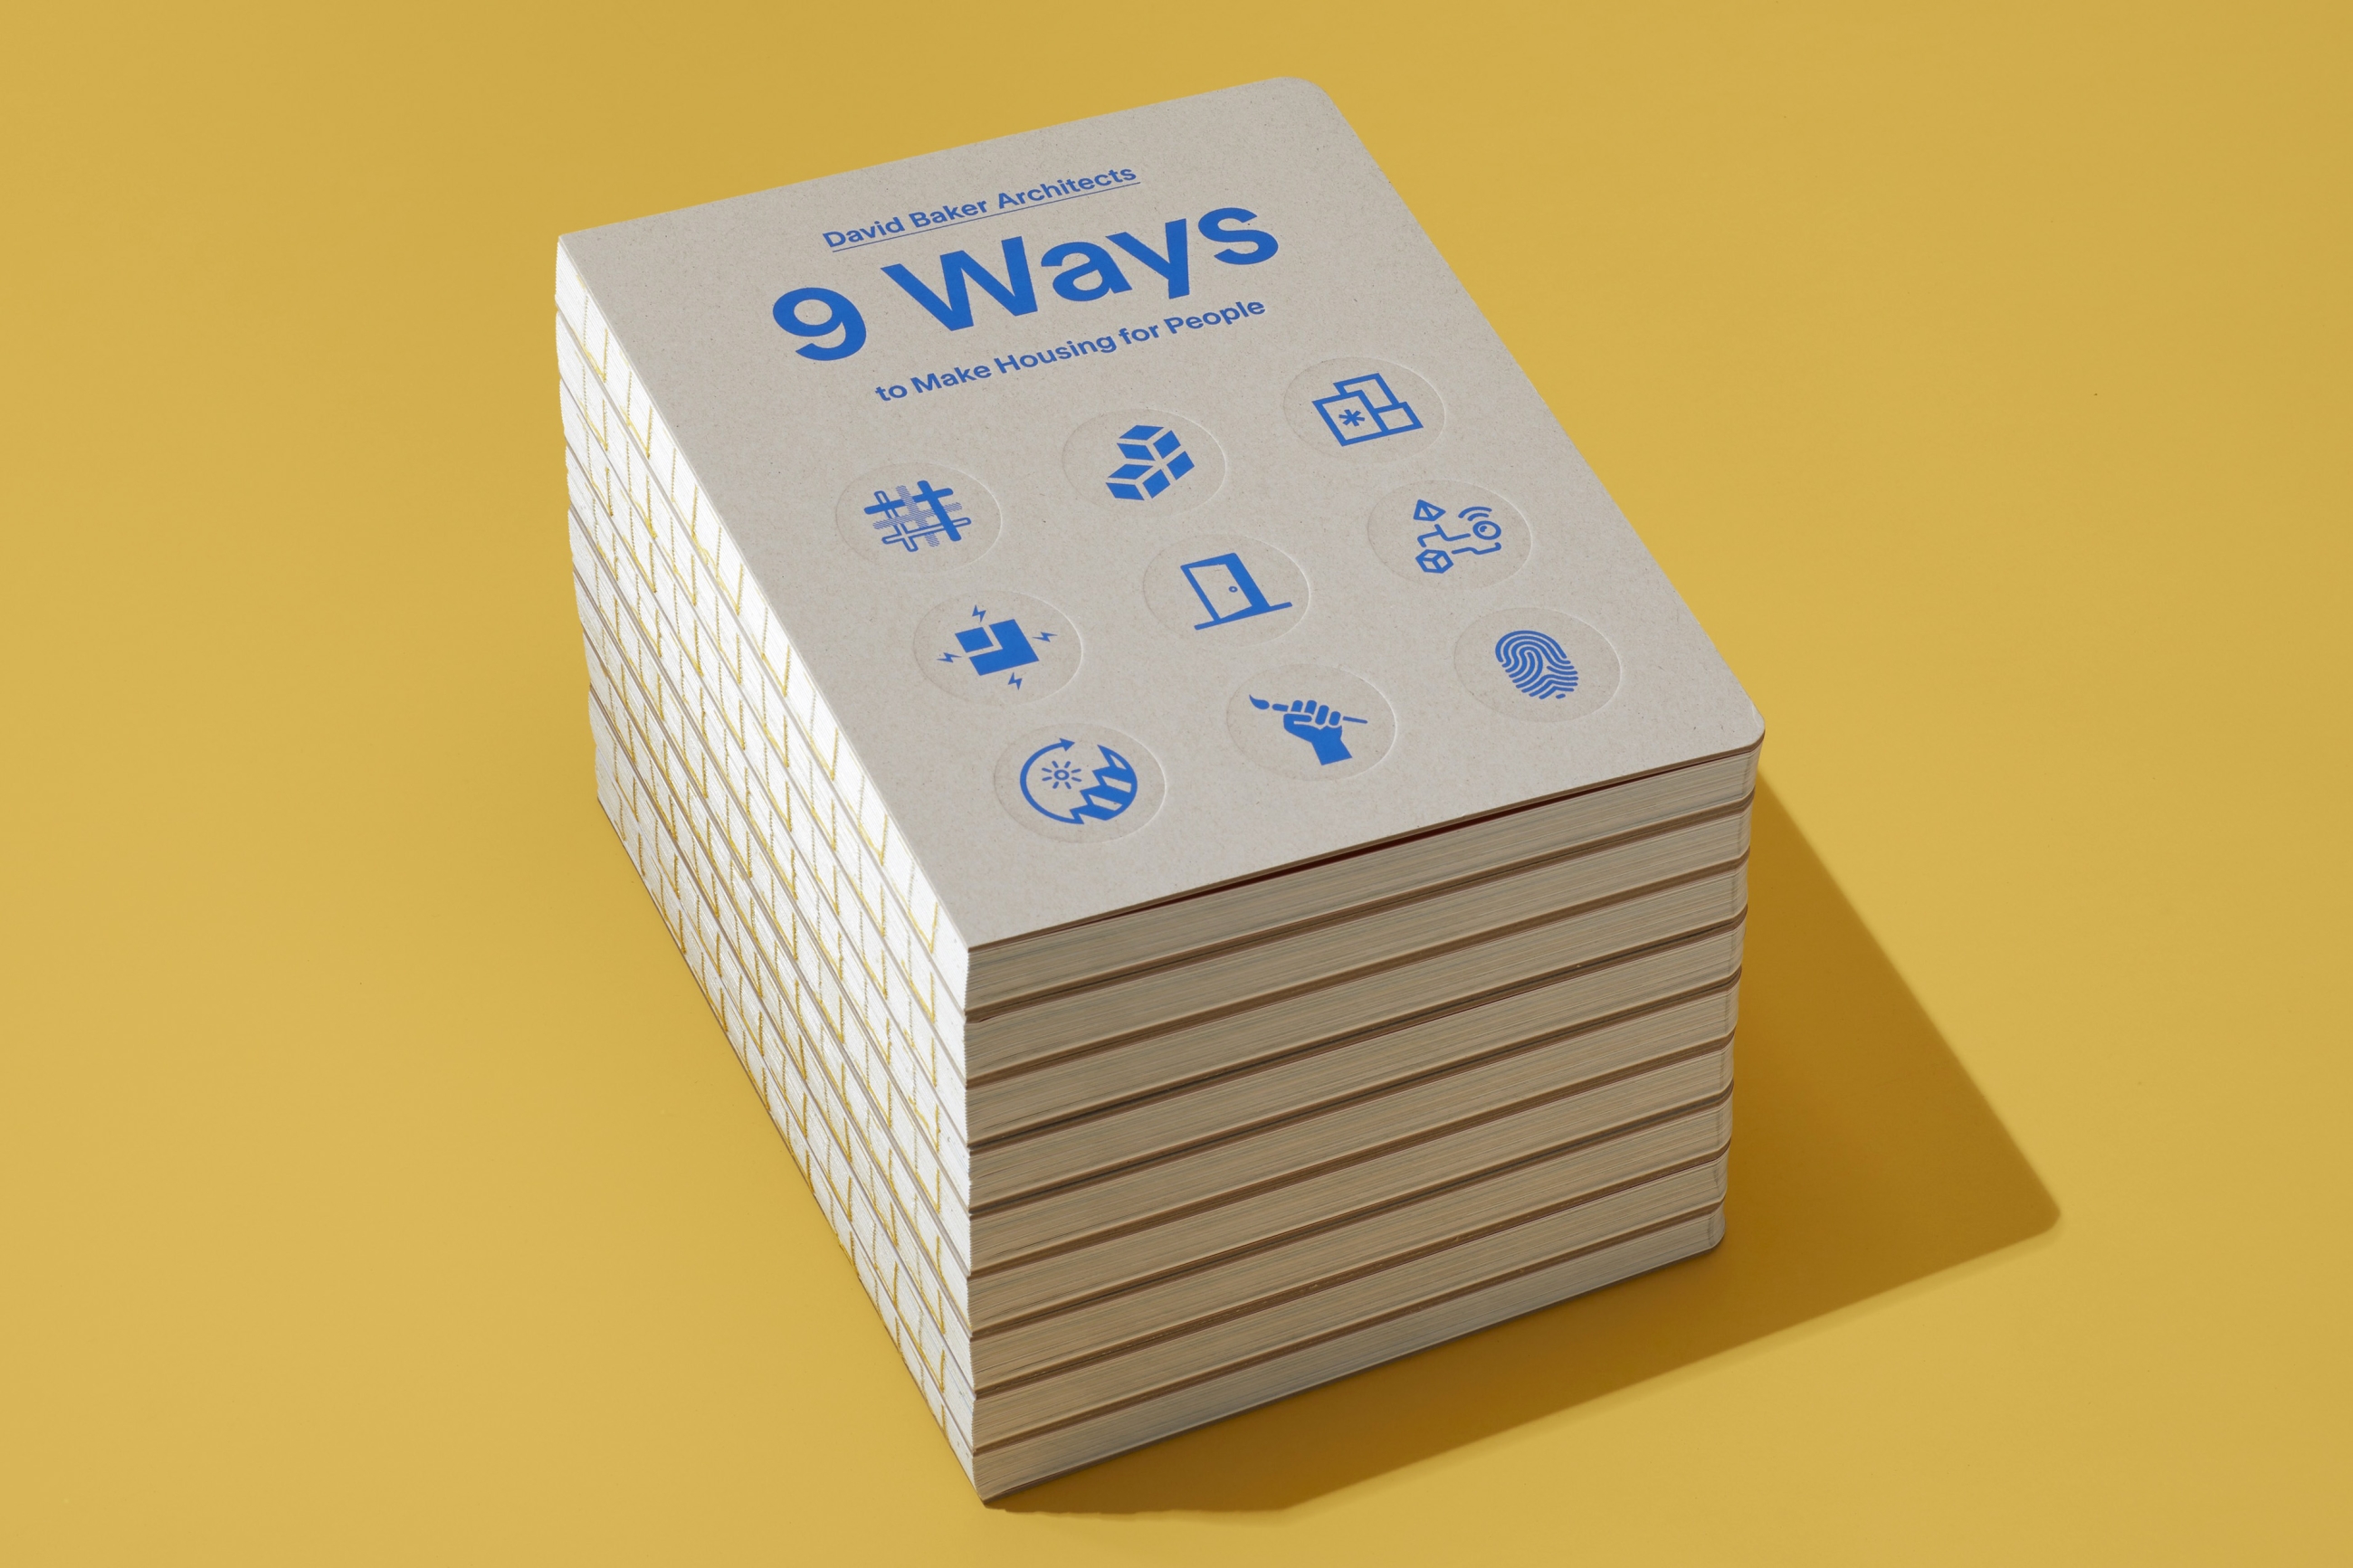 Stack of DBA’s new book 9 Ways to Make Housing for People on a bright yellow background.